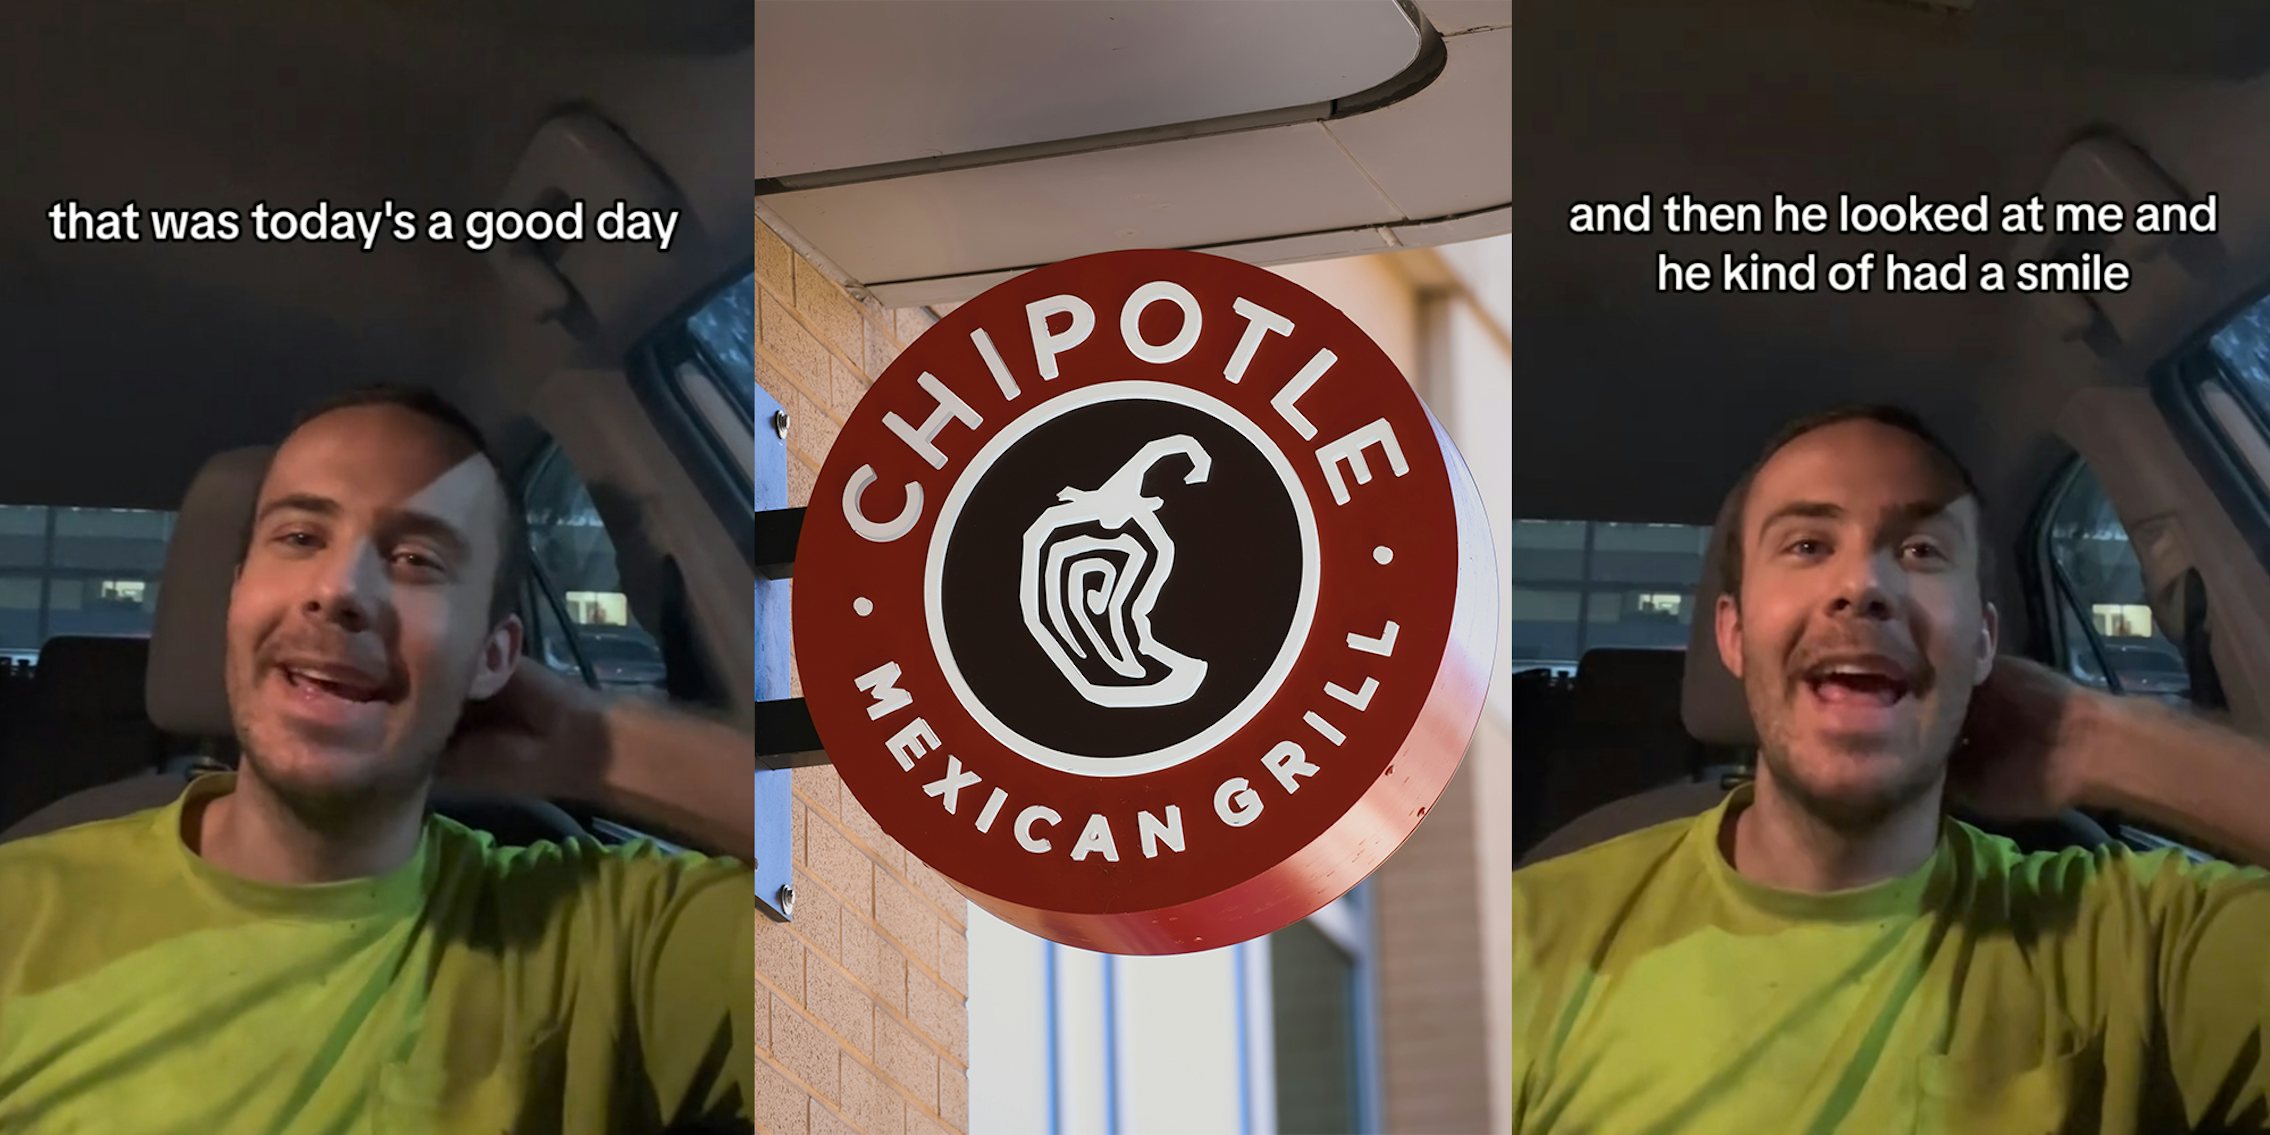 chipotle worker doesn't charge extra nice customer